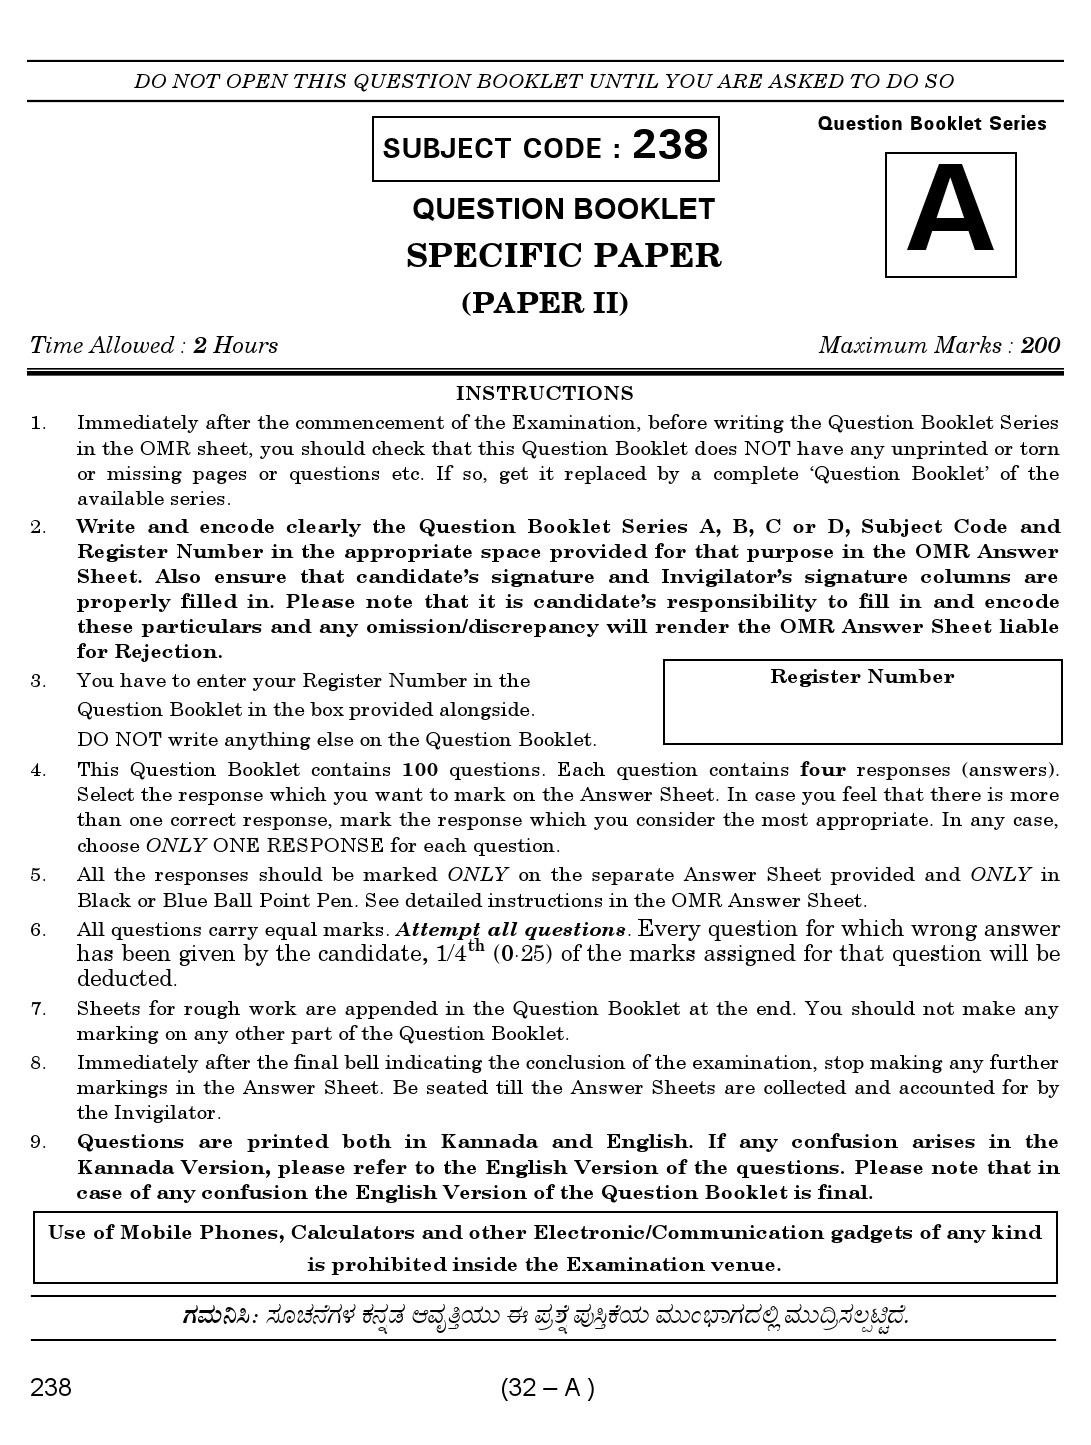 Karnataka PSC 238 Specific Paper II Librarian Exam Sample Question Paper 1